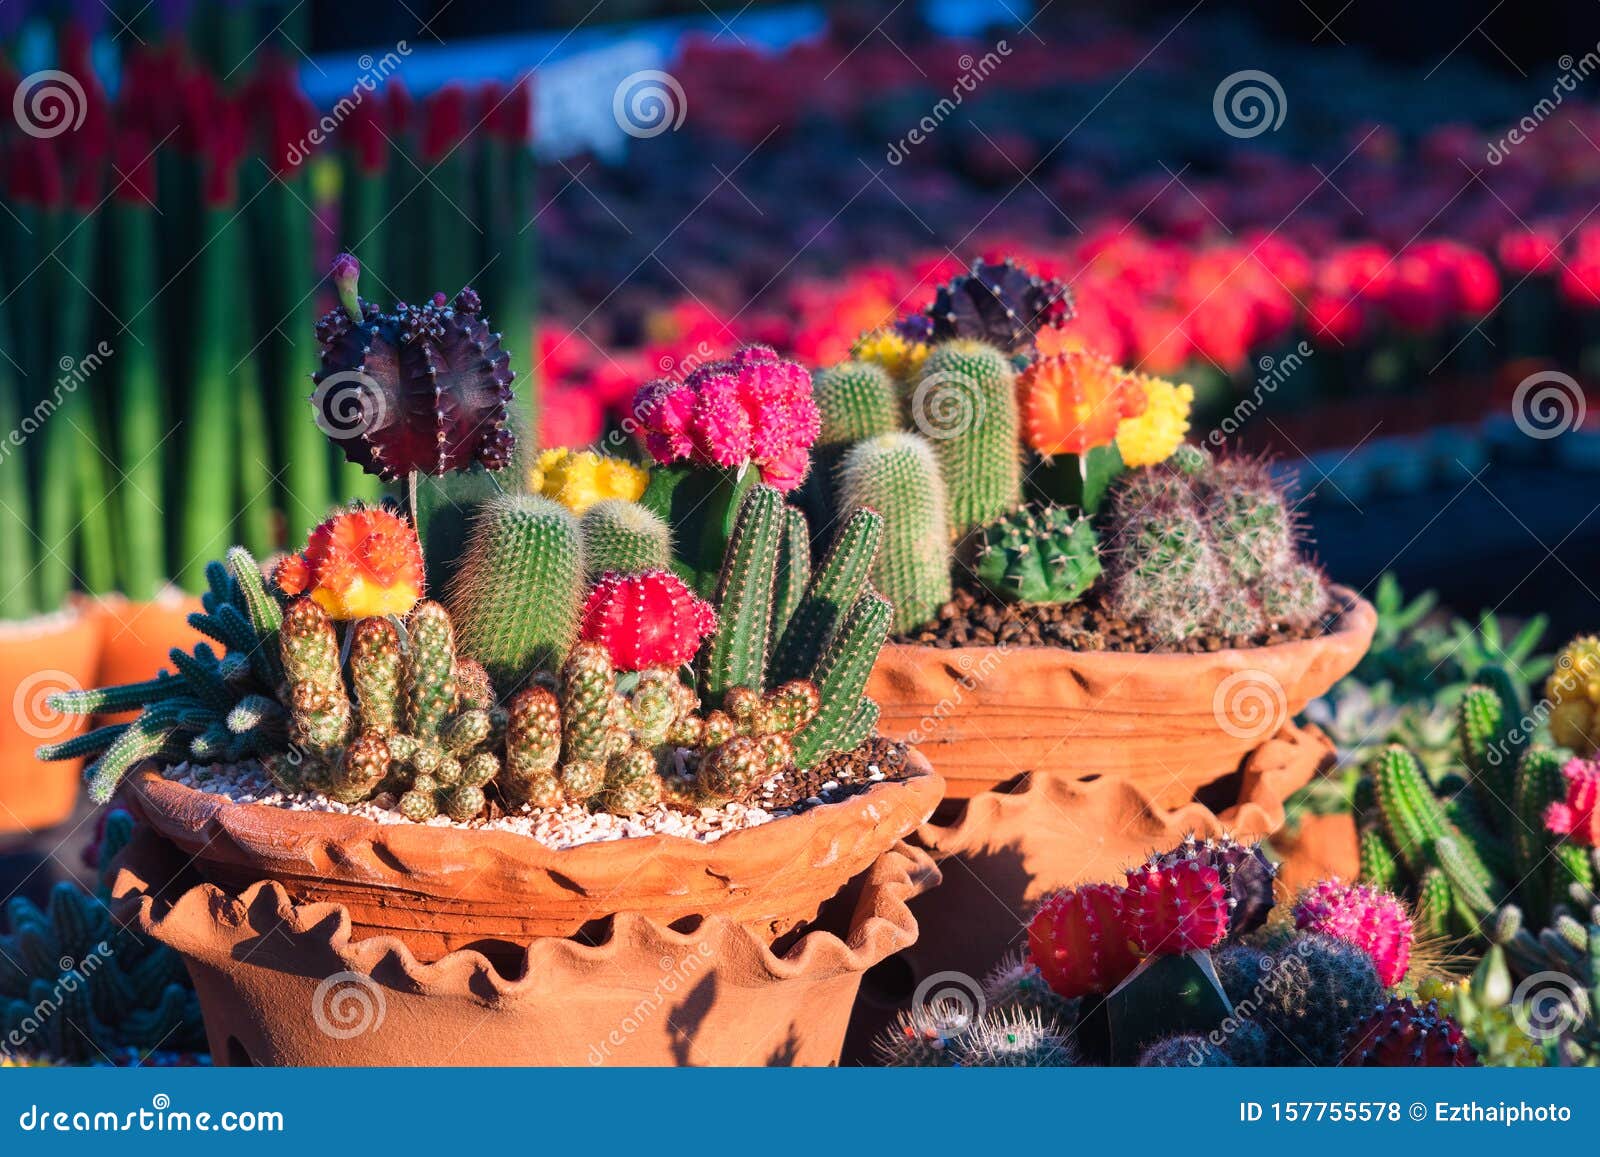 Cactus Plant Home Decoration, Group Of Small Cactus Pot. Stock Photo,  Picture and Royalty Free Image. Image 73696867.